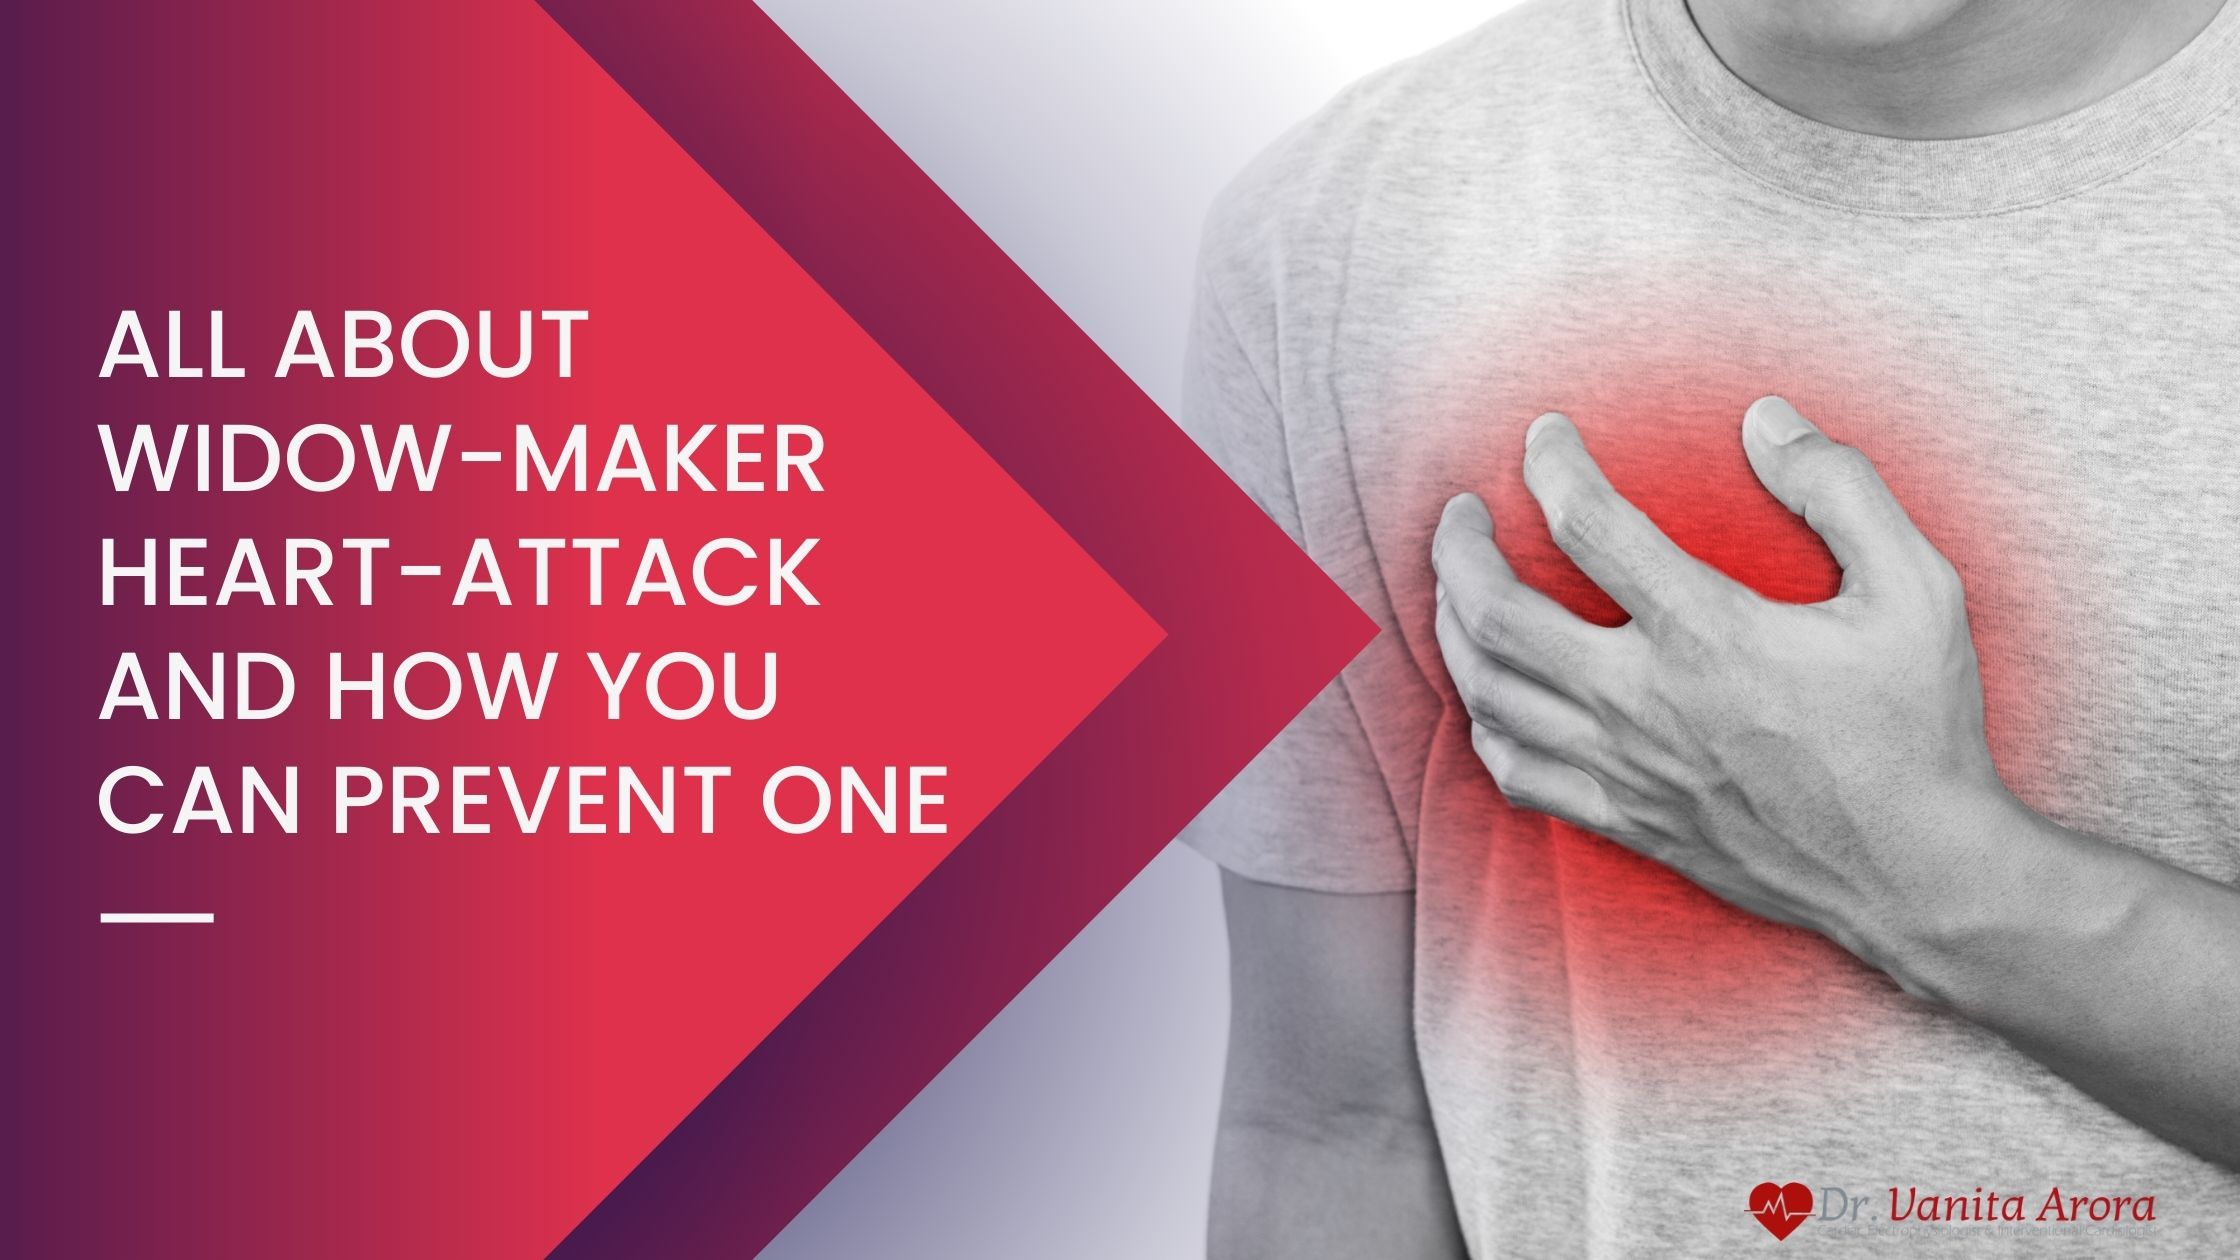 All About Widow-Maker Heart-Attack And How You Can Prevent One